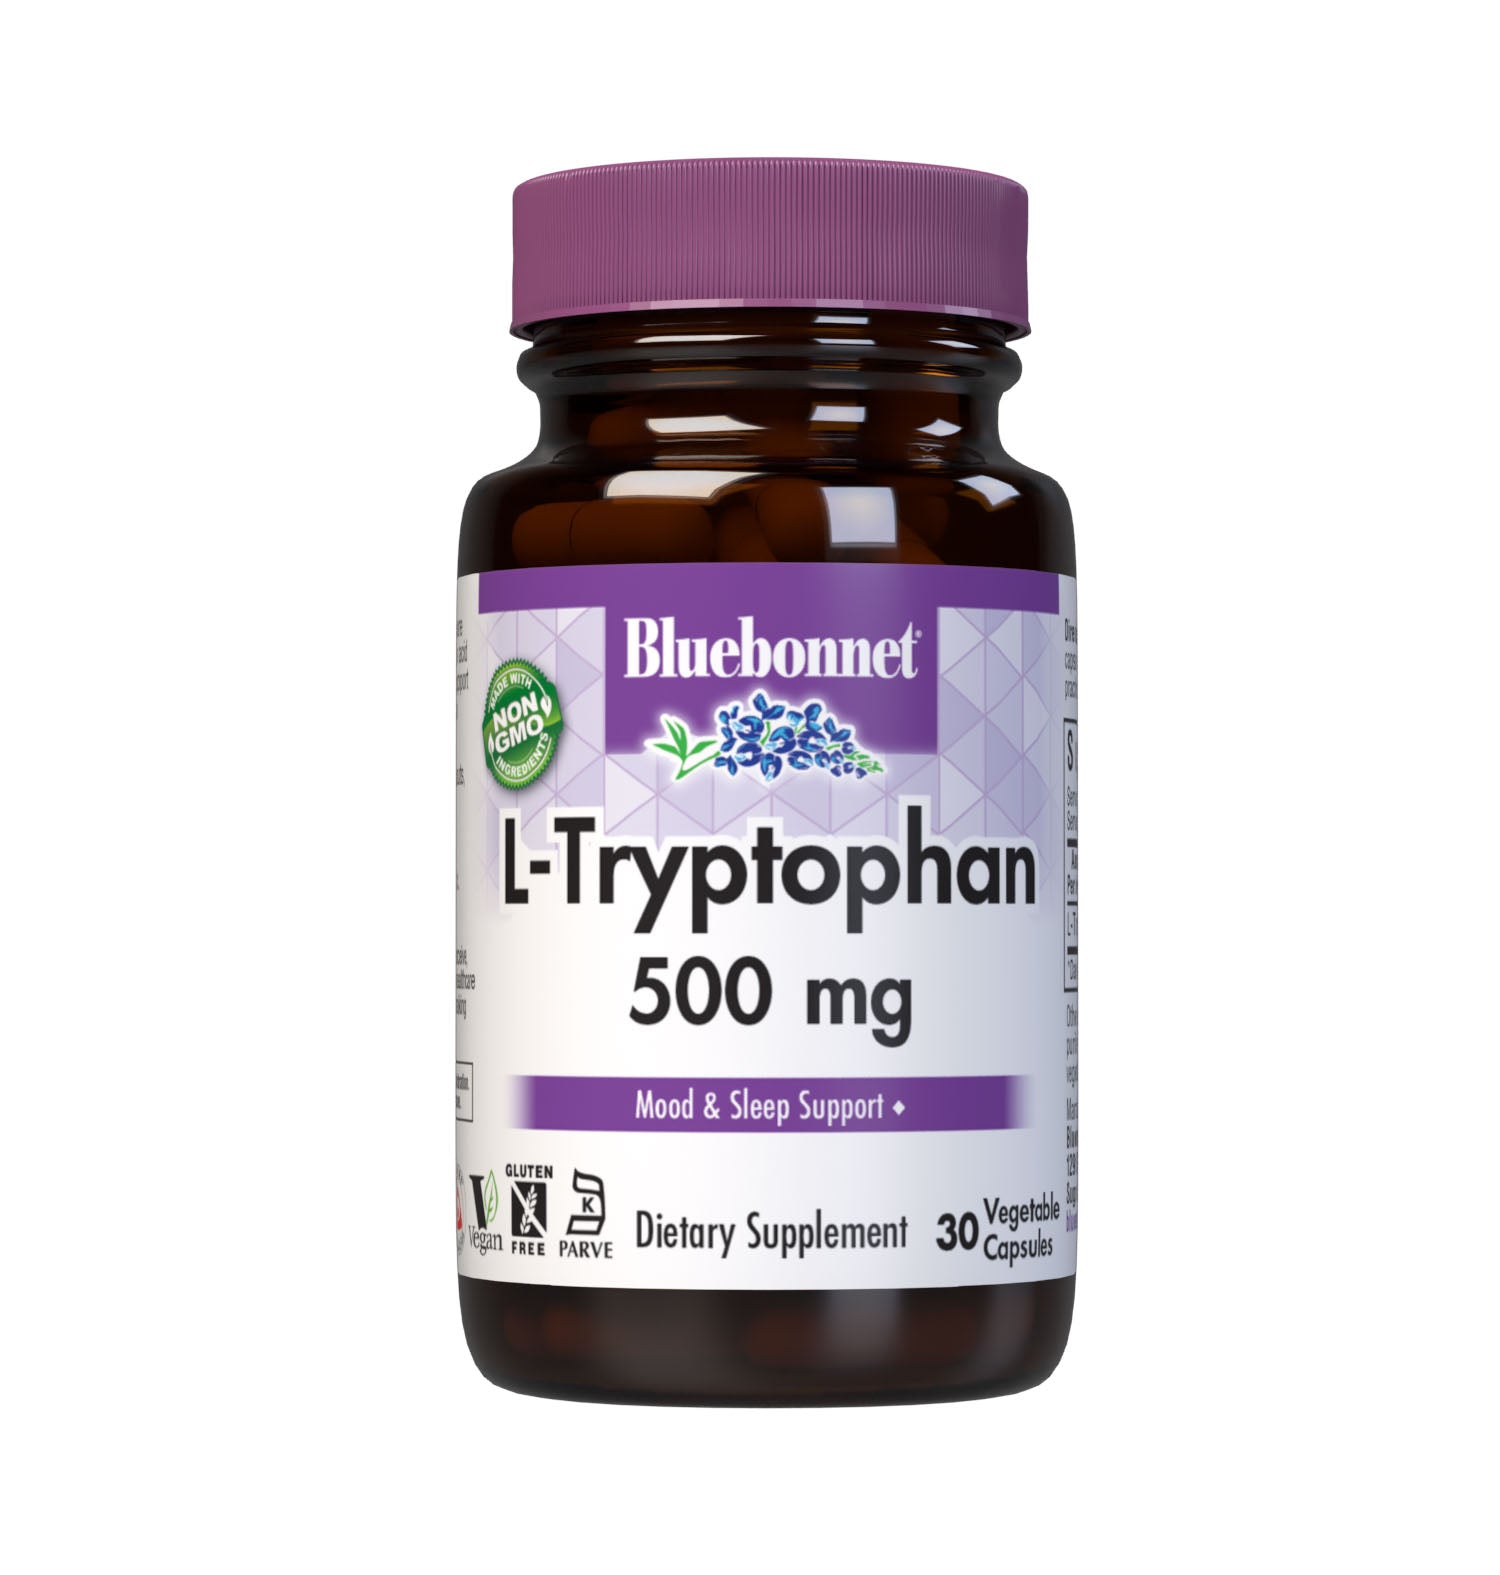 Bluebonnet’s L-Tryptophan 500 mg 30 Vegetable Capsules are formulated with a vegetarian source of the free-form amino acid L-tryptophan called TryptoPure from Ajinomoto to help support a positive mood, a sense of relaxation, as well as to reduce occasional sleeplessness. #size_30 count